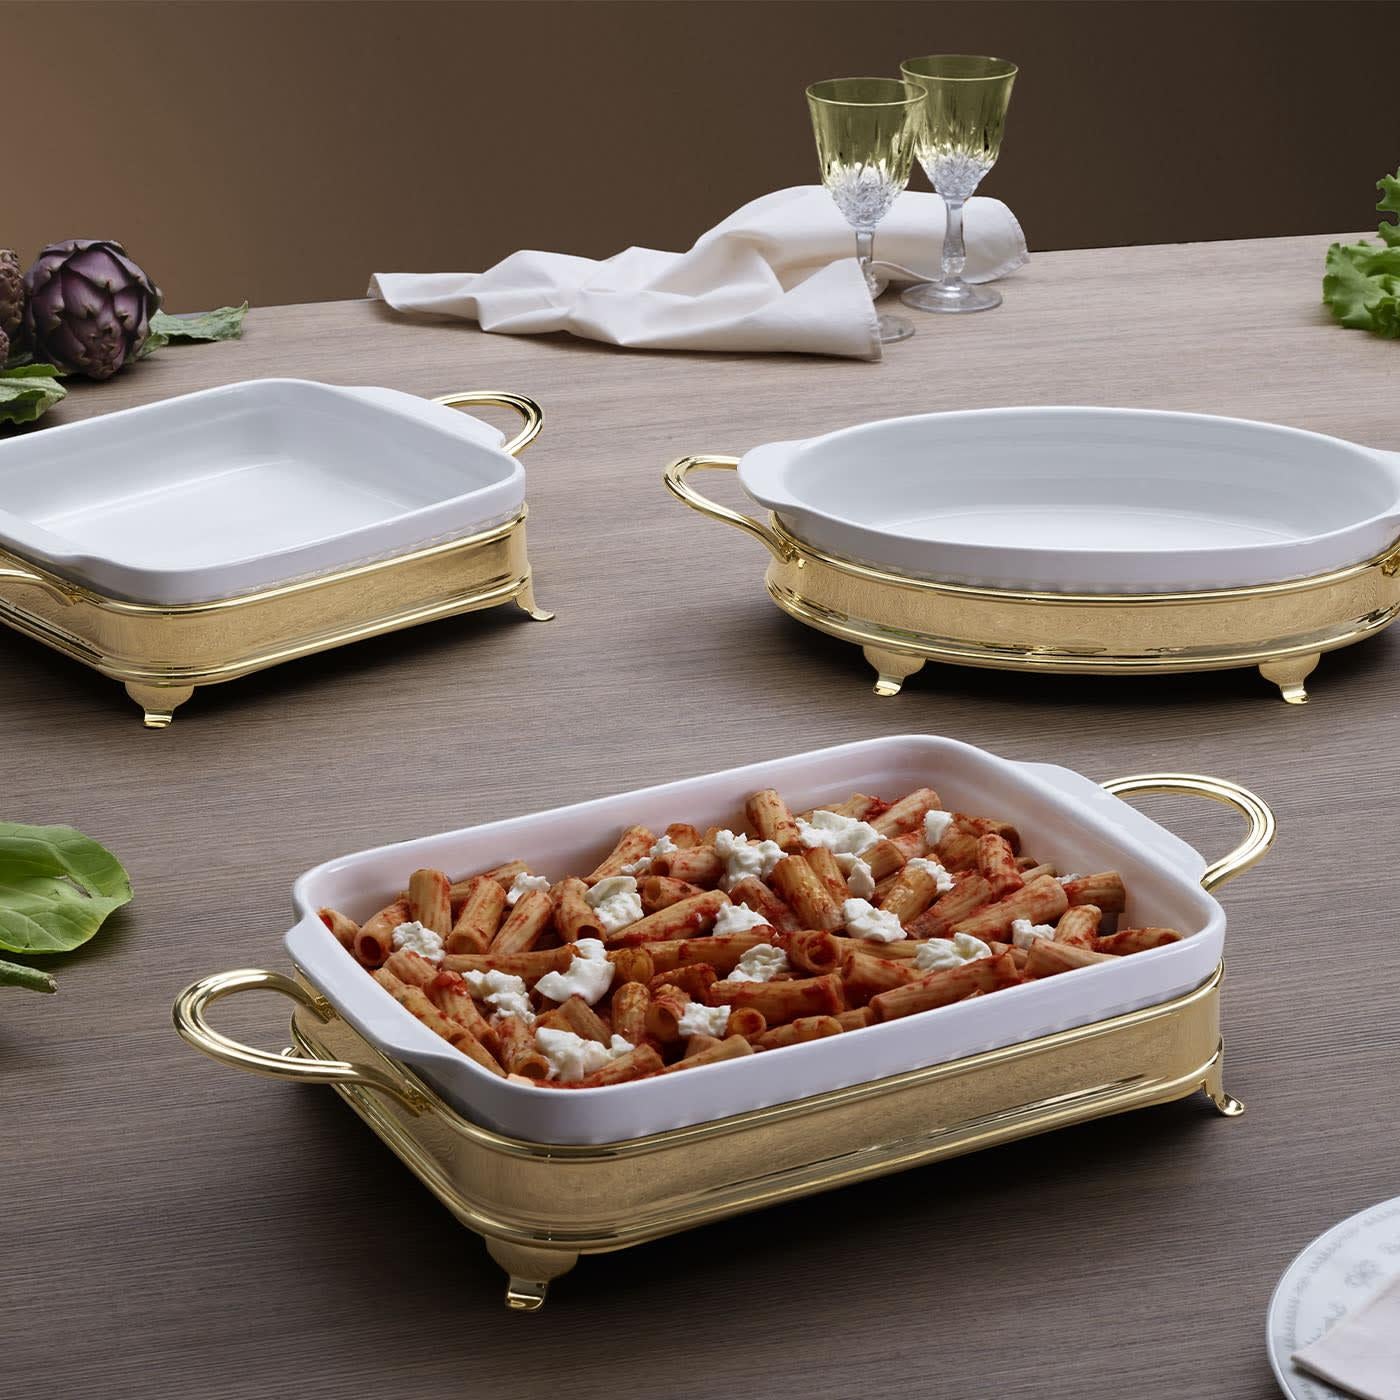 A luxurious holder crafted of brass and showcased in a precious gleaming finish comes in this set together with a precious baking dish in white ceramic. Tiny feet - avoiding direct contact with the table - allow for immediately serving food even if